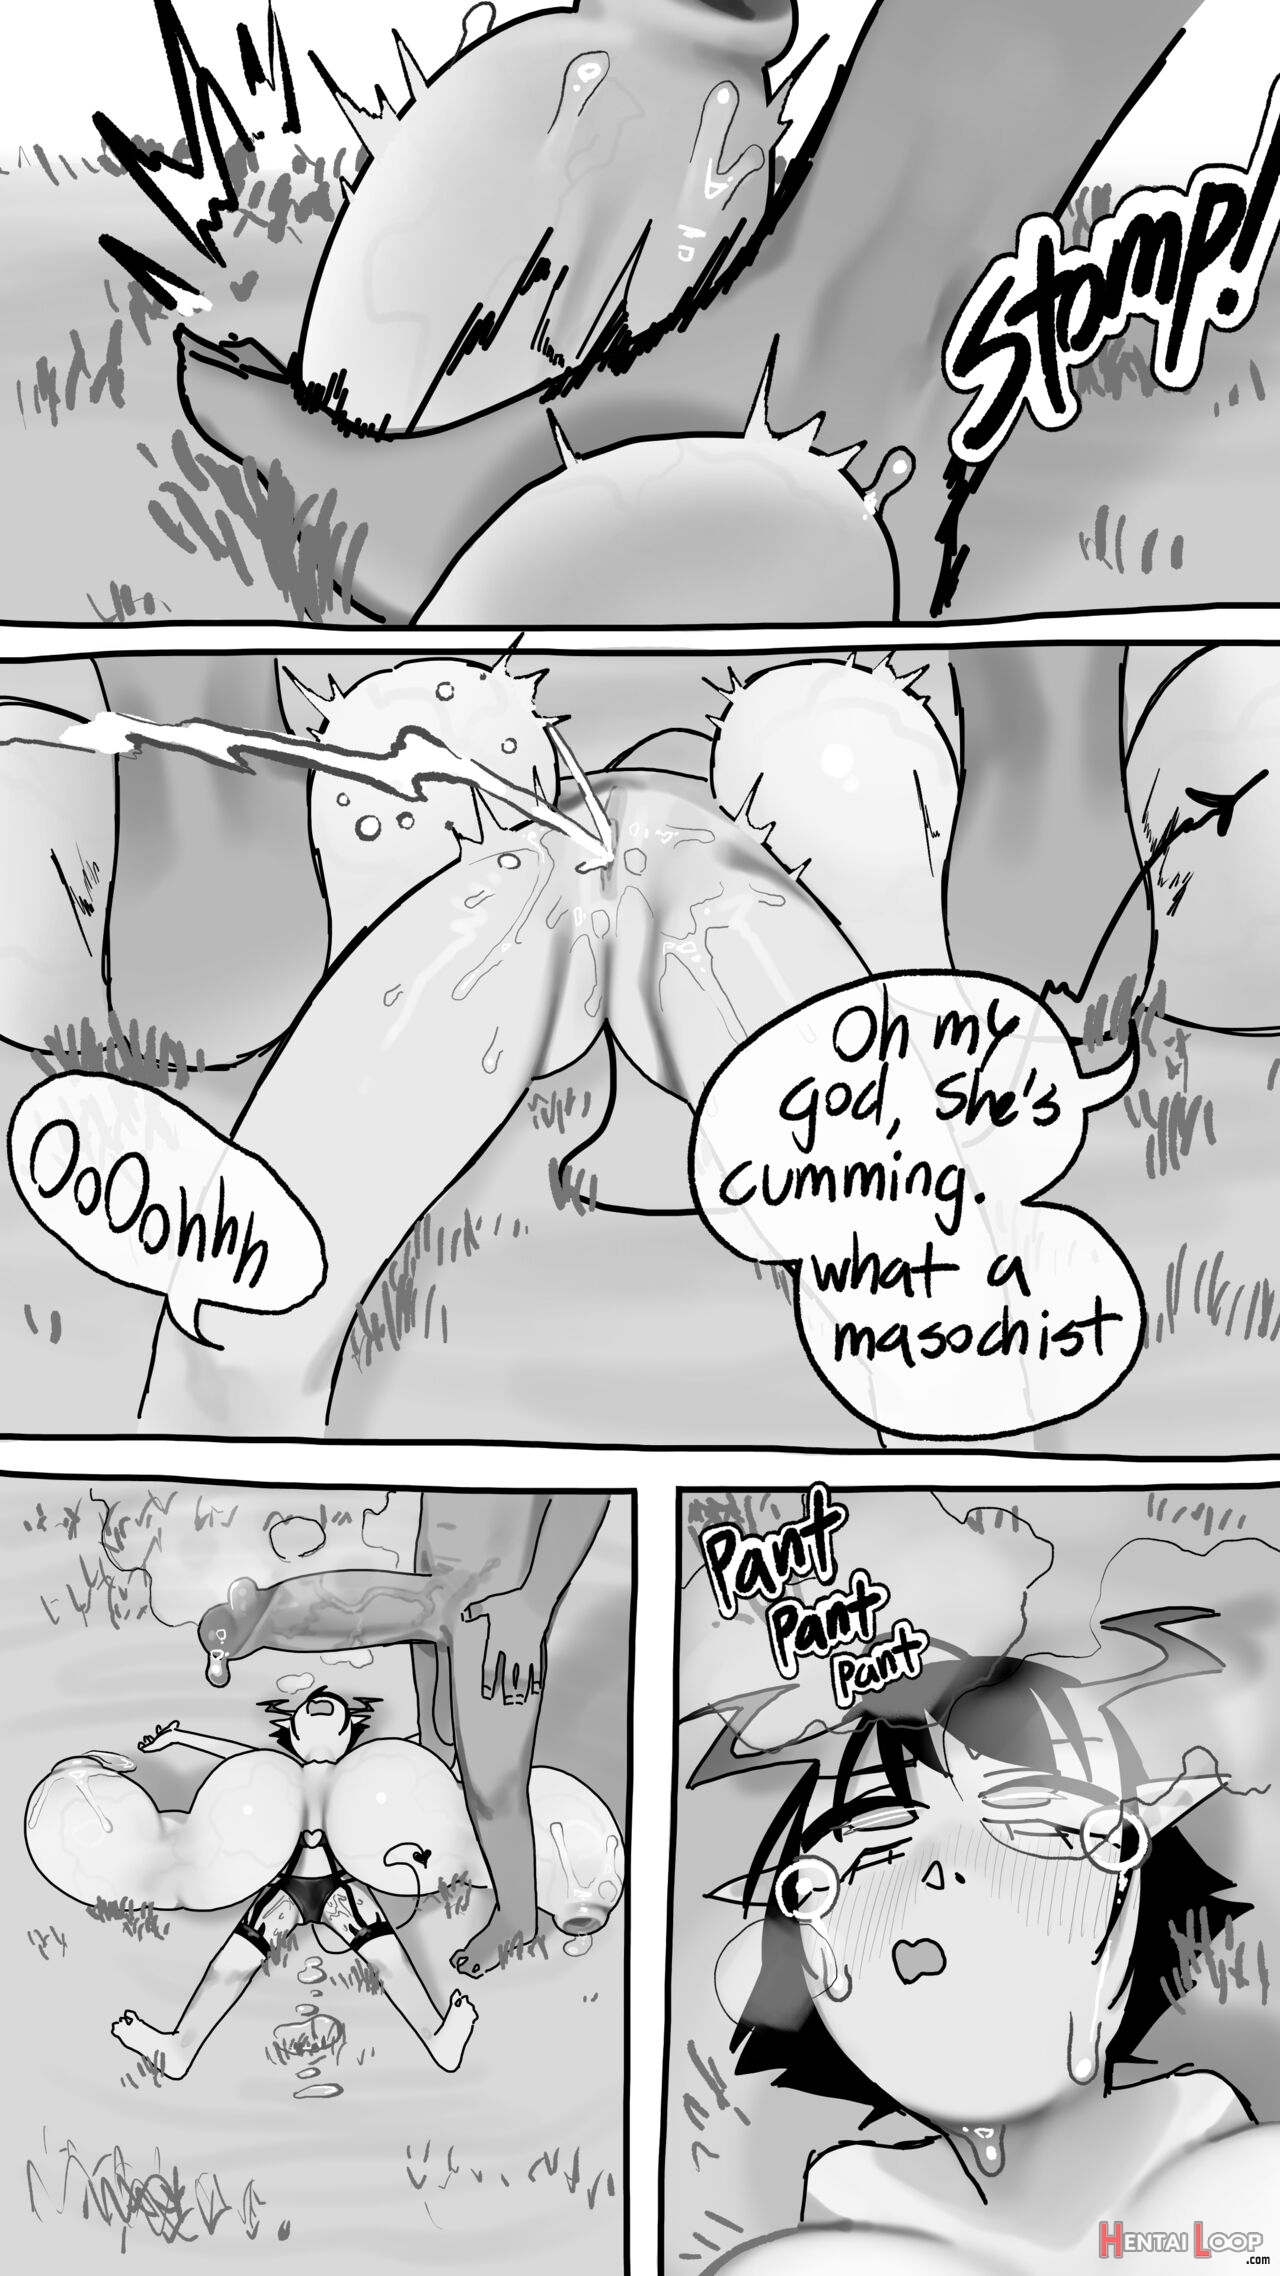 Succubus Story - Decensored page 18